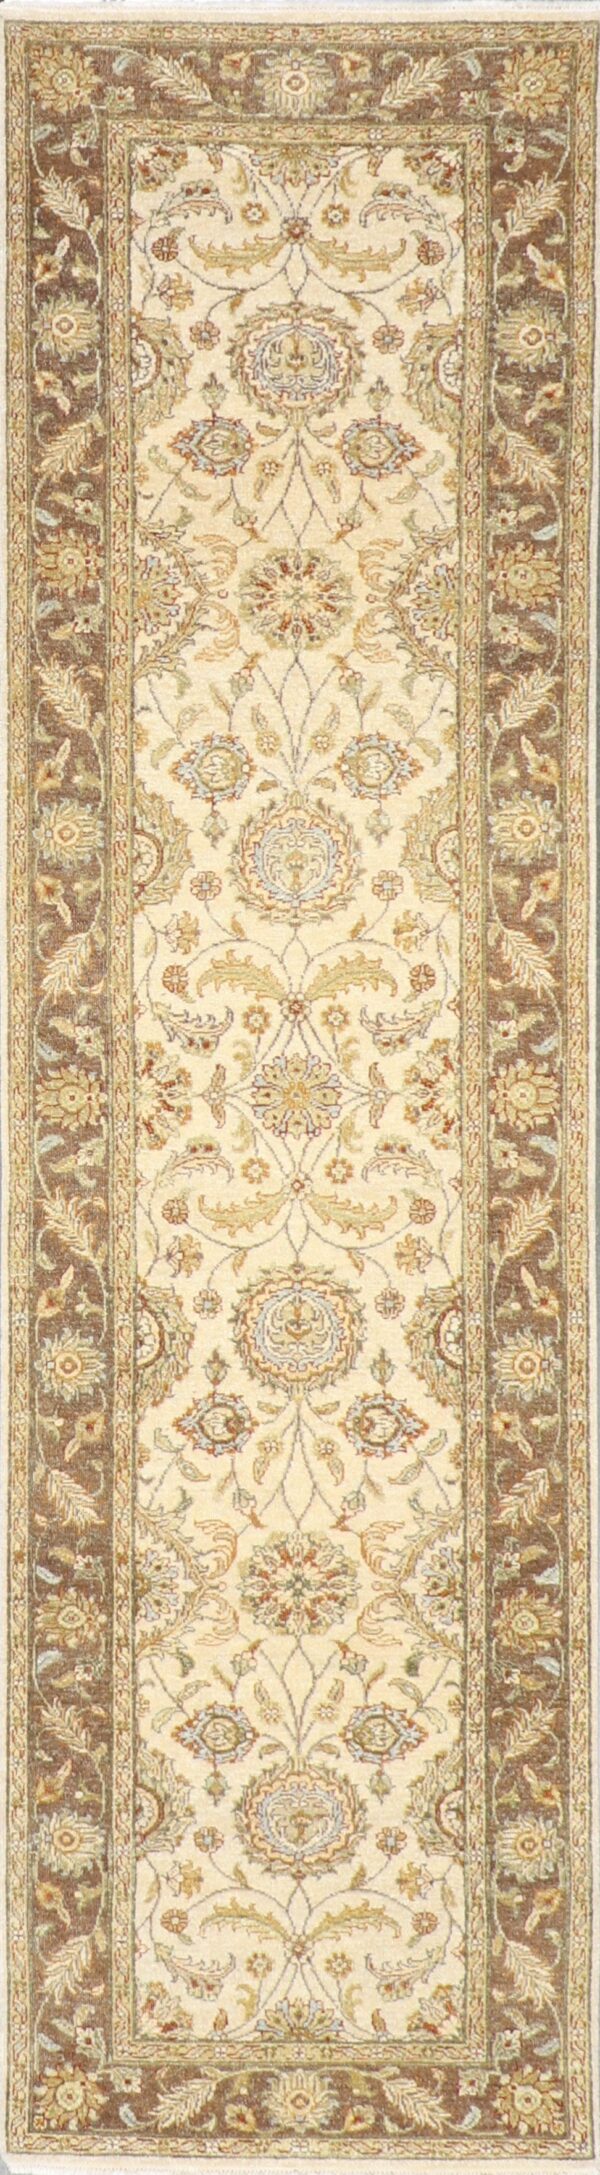 2’7”x9’9” Decorative Tan Hand Spun Wool Hand-Knotted Rug - Direct Rug Import | Rugs in Chicago, Indiana,South Bend,Granger